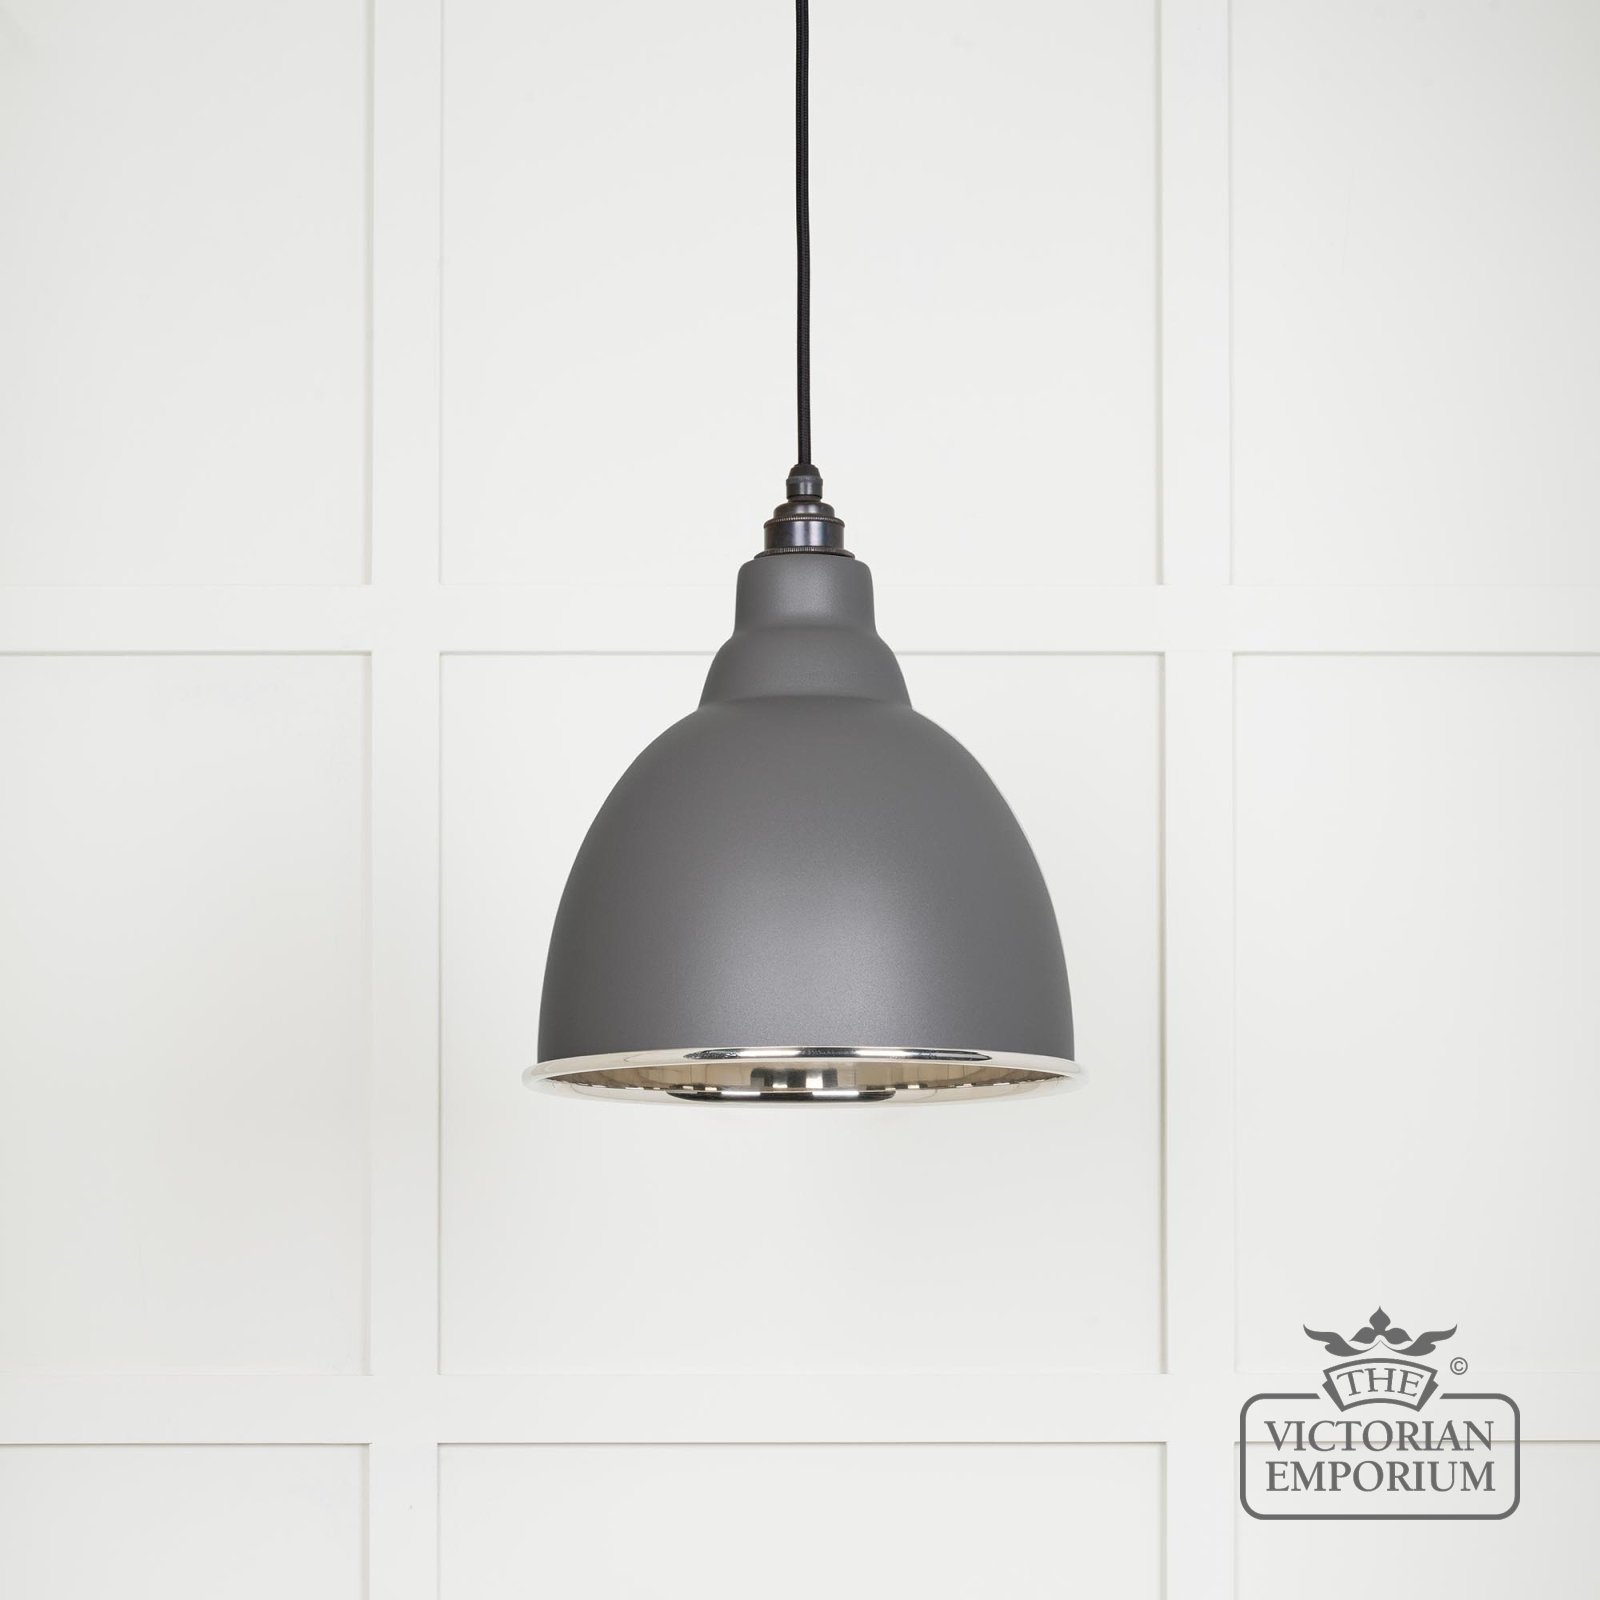 Brindle pendant light in bluff with nickel interior